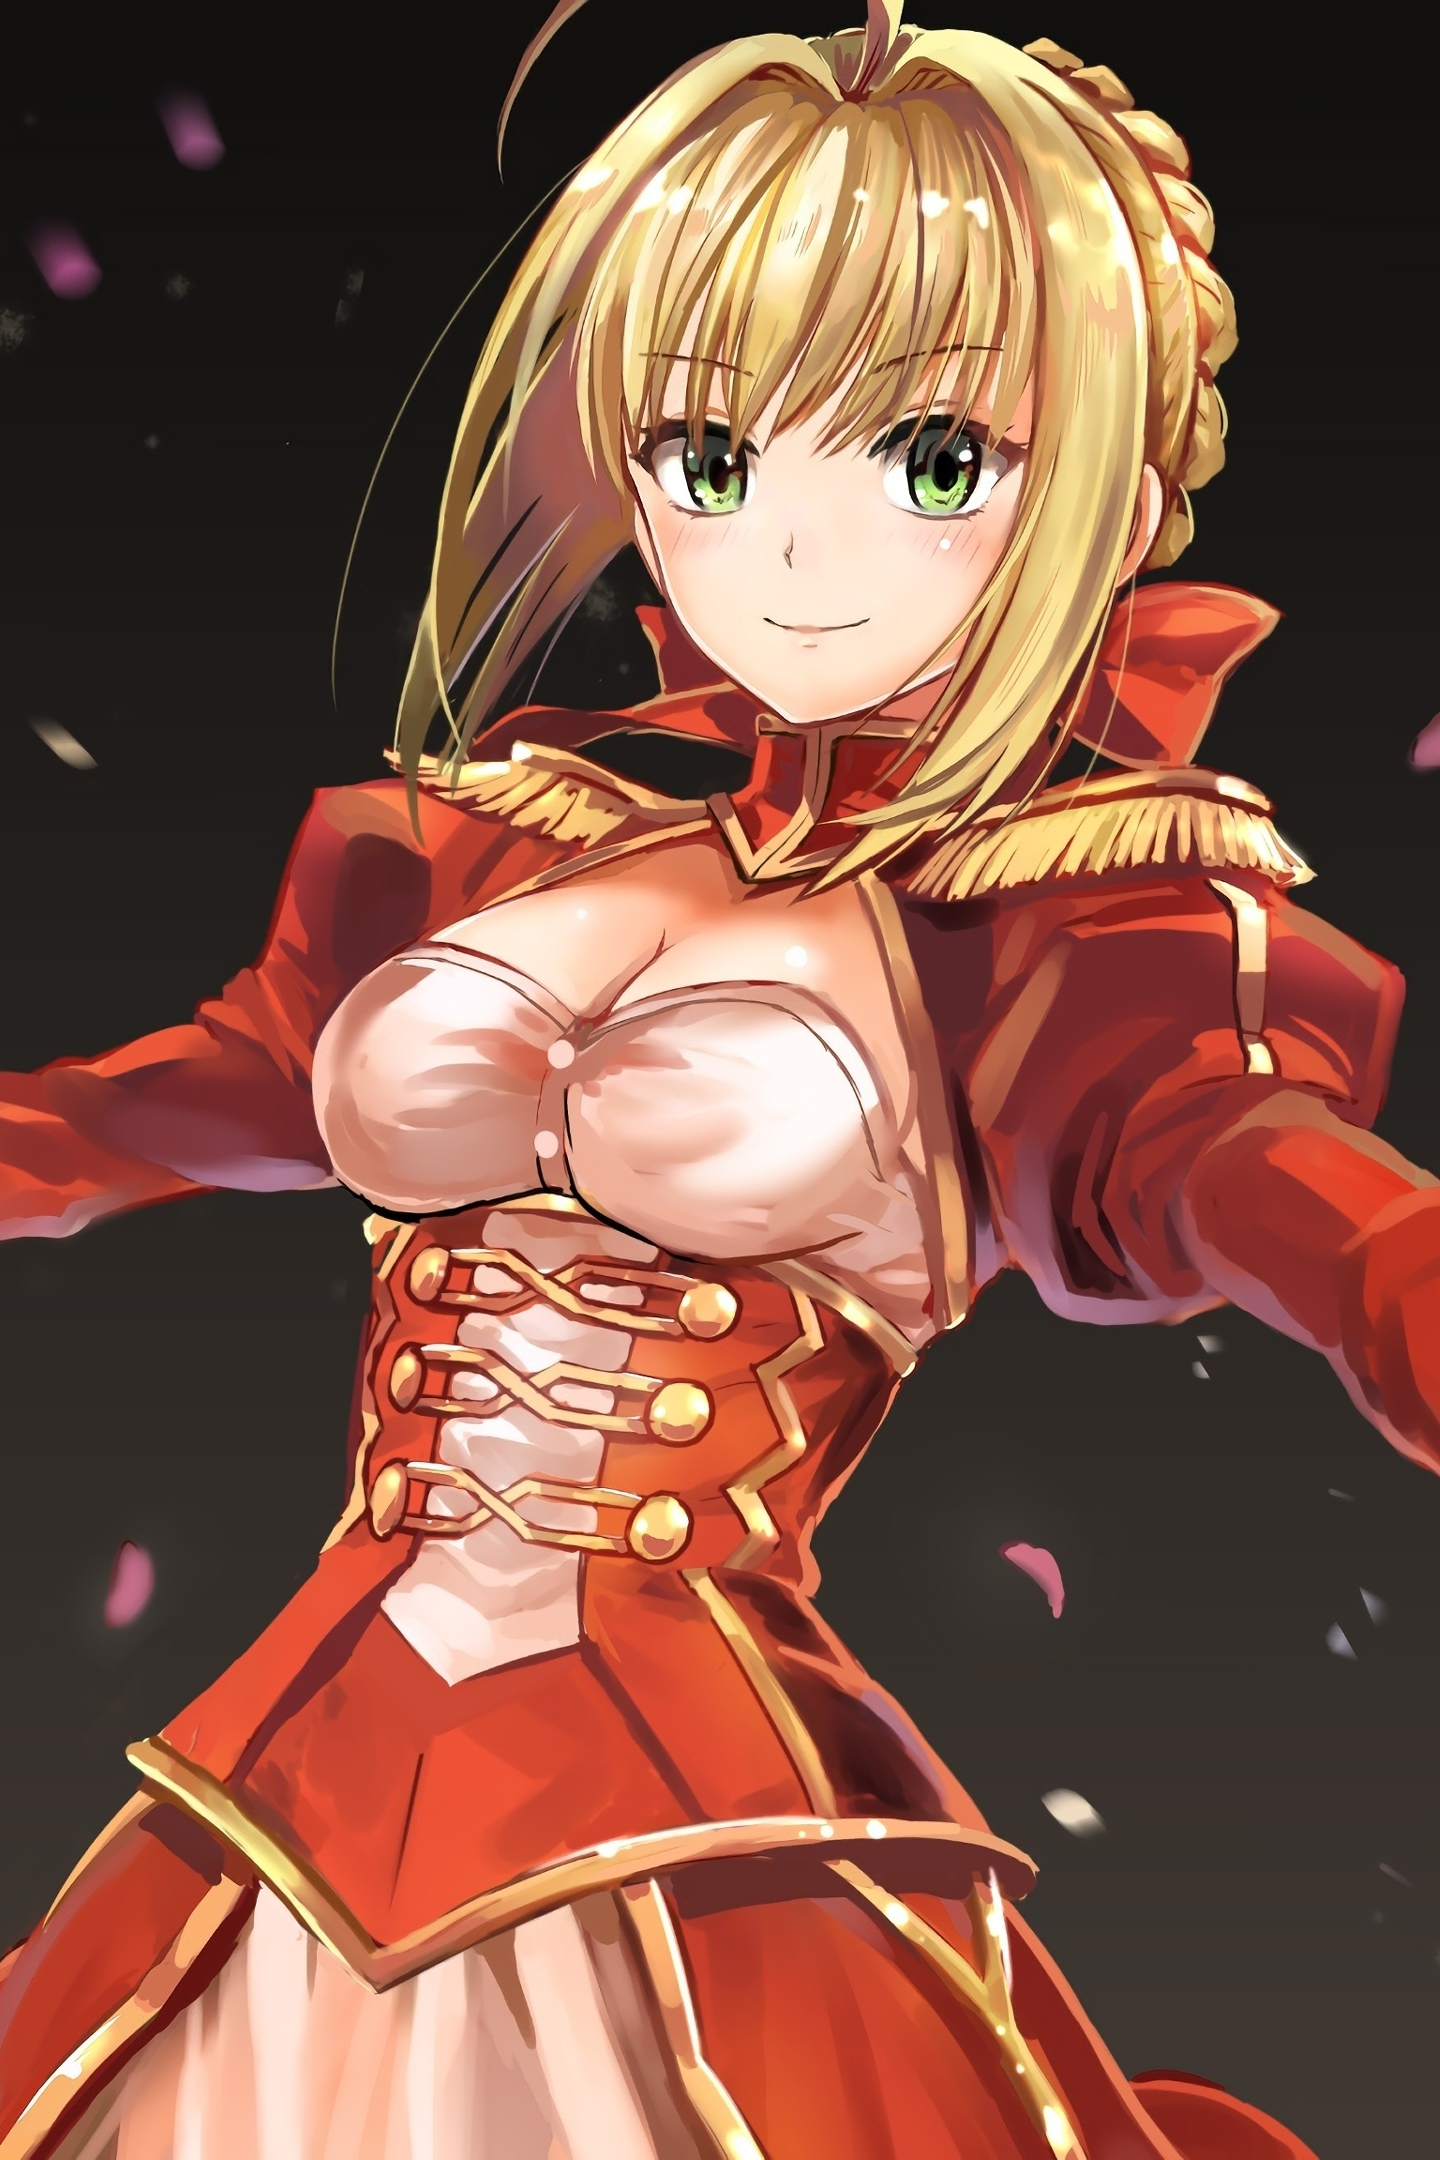 Download Wallpaper 1440x2630 Fate Extra Last Encore Anime Girl Beautiful Saber Samsung Galaxy Note 8 1440x2630 Hd Background 4664